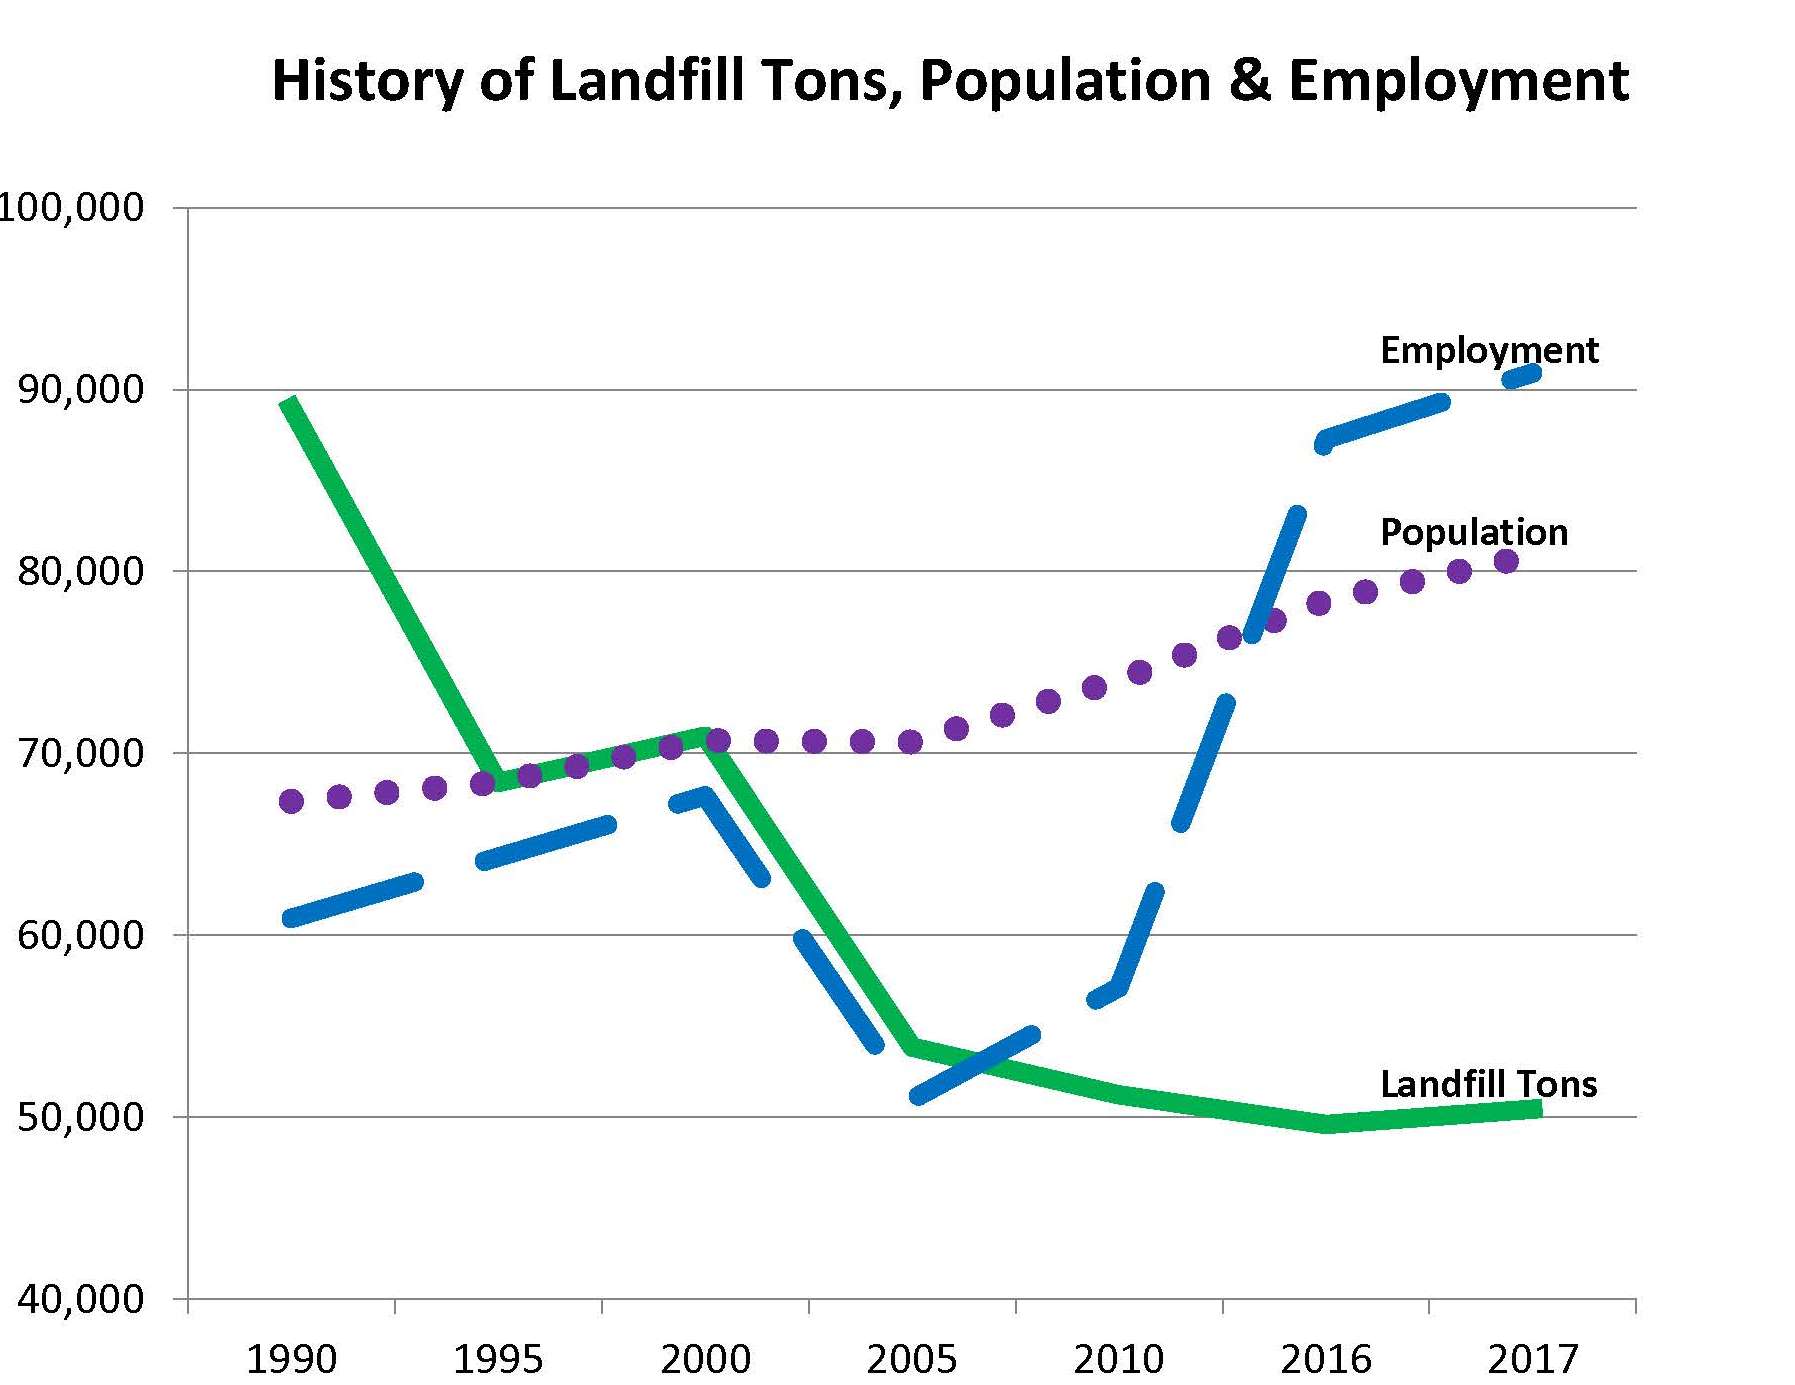 History of Landfill Tons, Population & Employment from 1990 to 2017